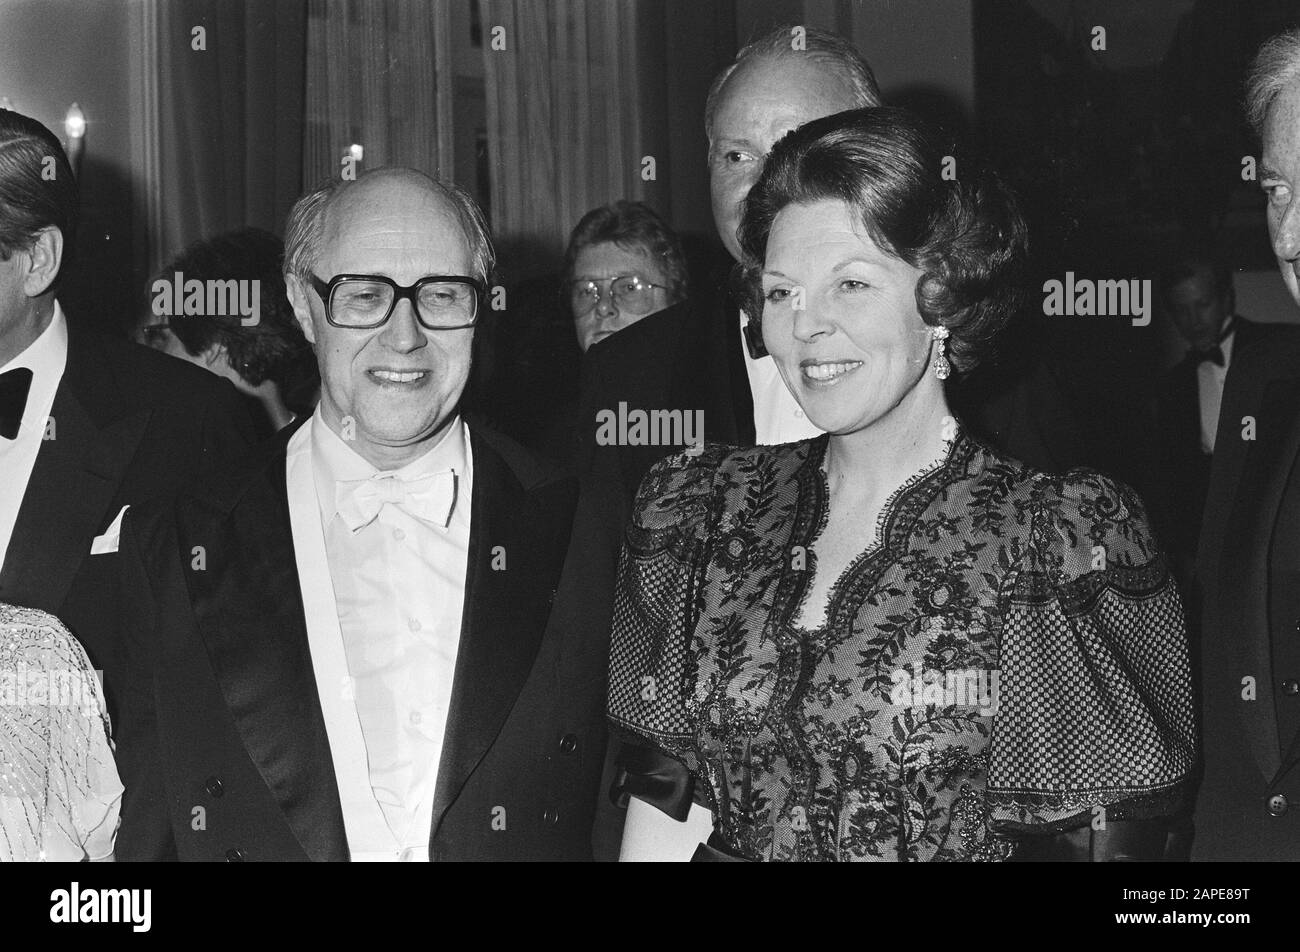 Beatrix and Claus at the Bicentennial Concert at by National Symphony Orchestra of Washington DC in Concertgebouw Rostropovich Date: February 18, 1982 Keywords: concerts, conductors Personal name: Beatrix, princess, Bicentennial, Claus, prince Stock Photo